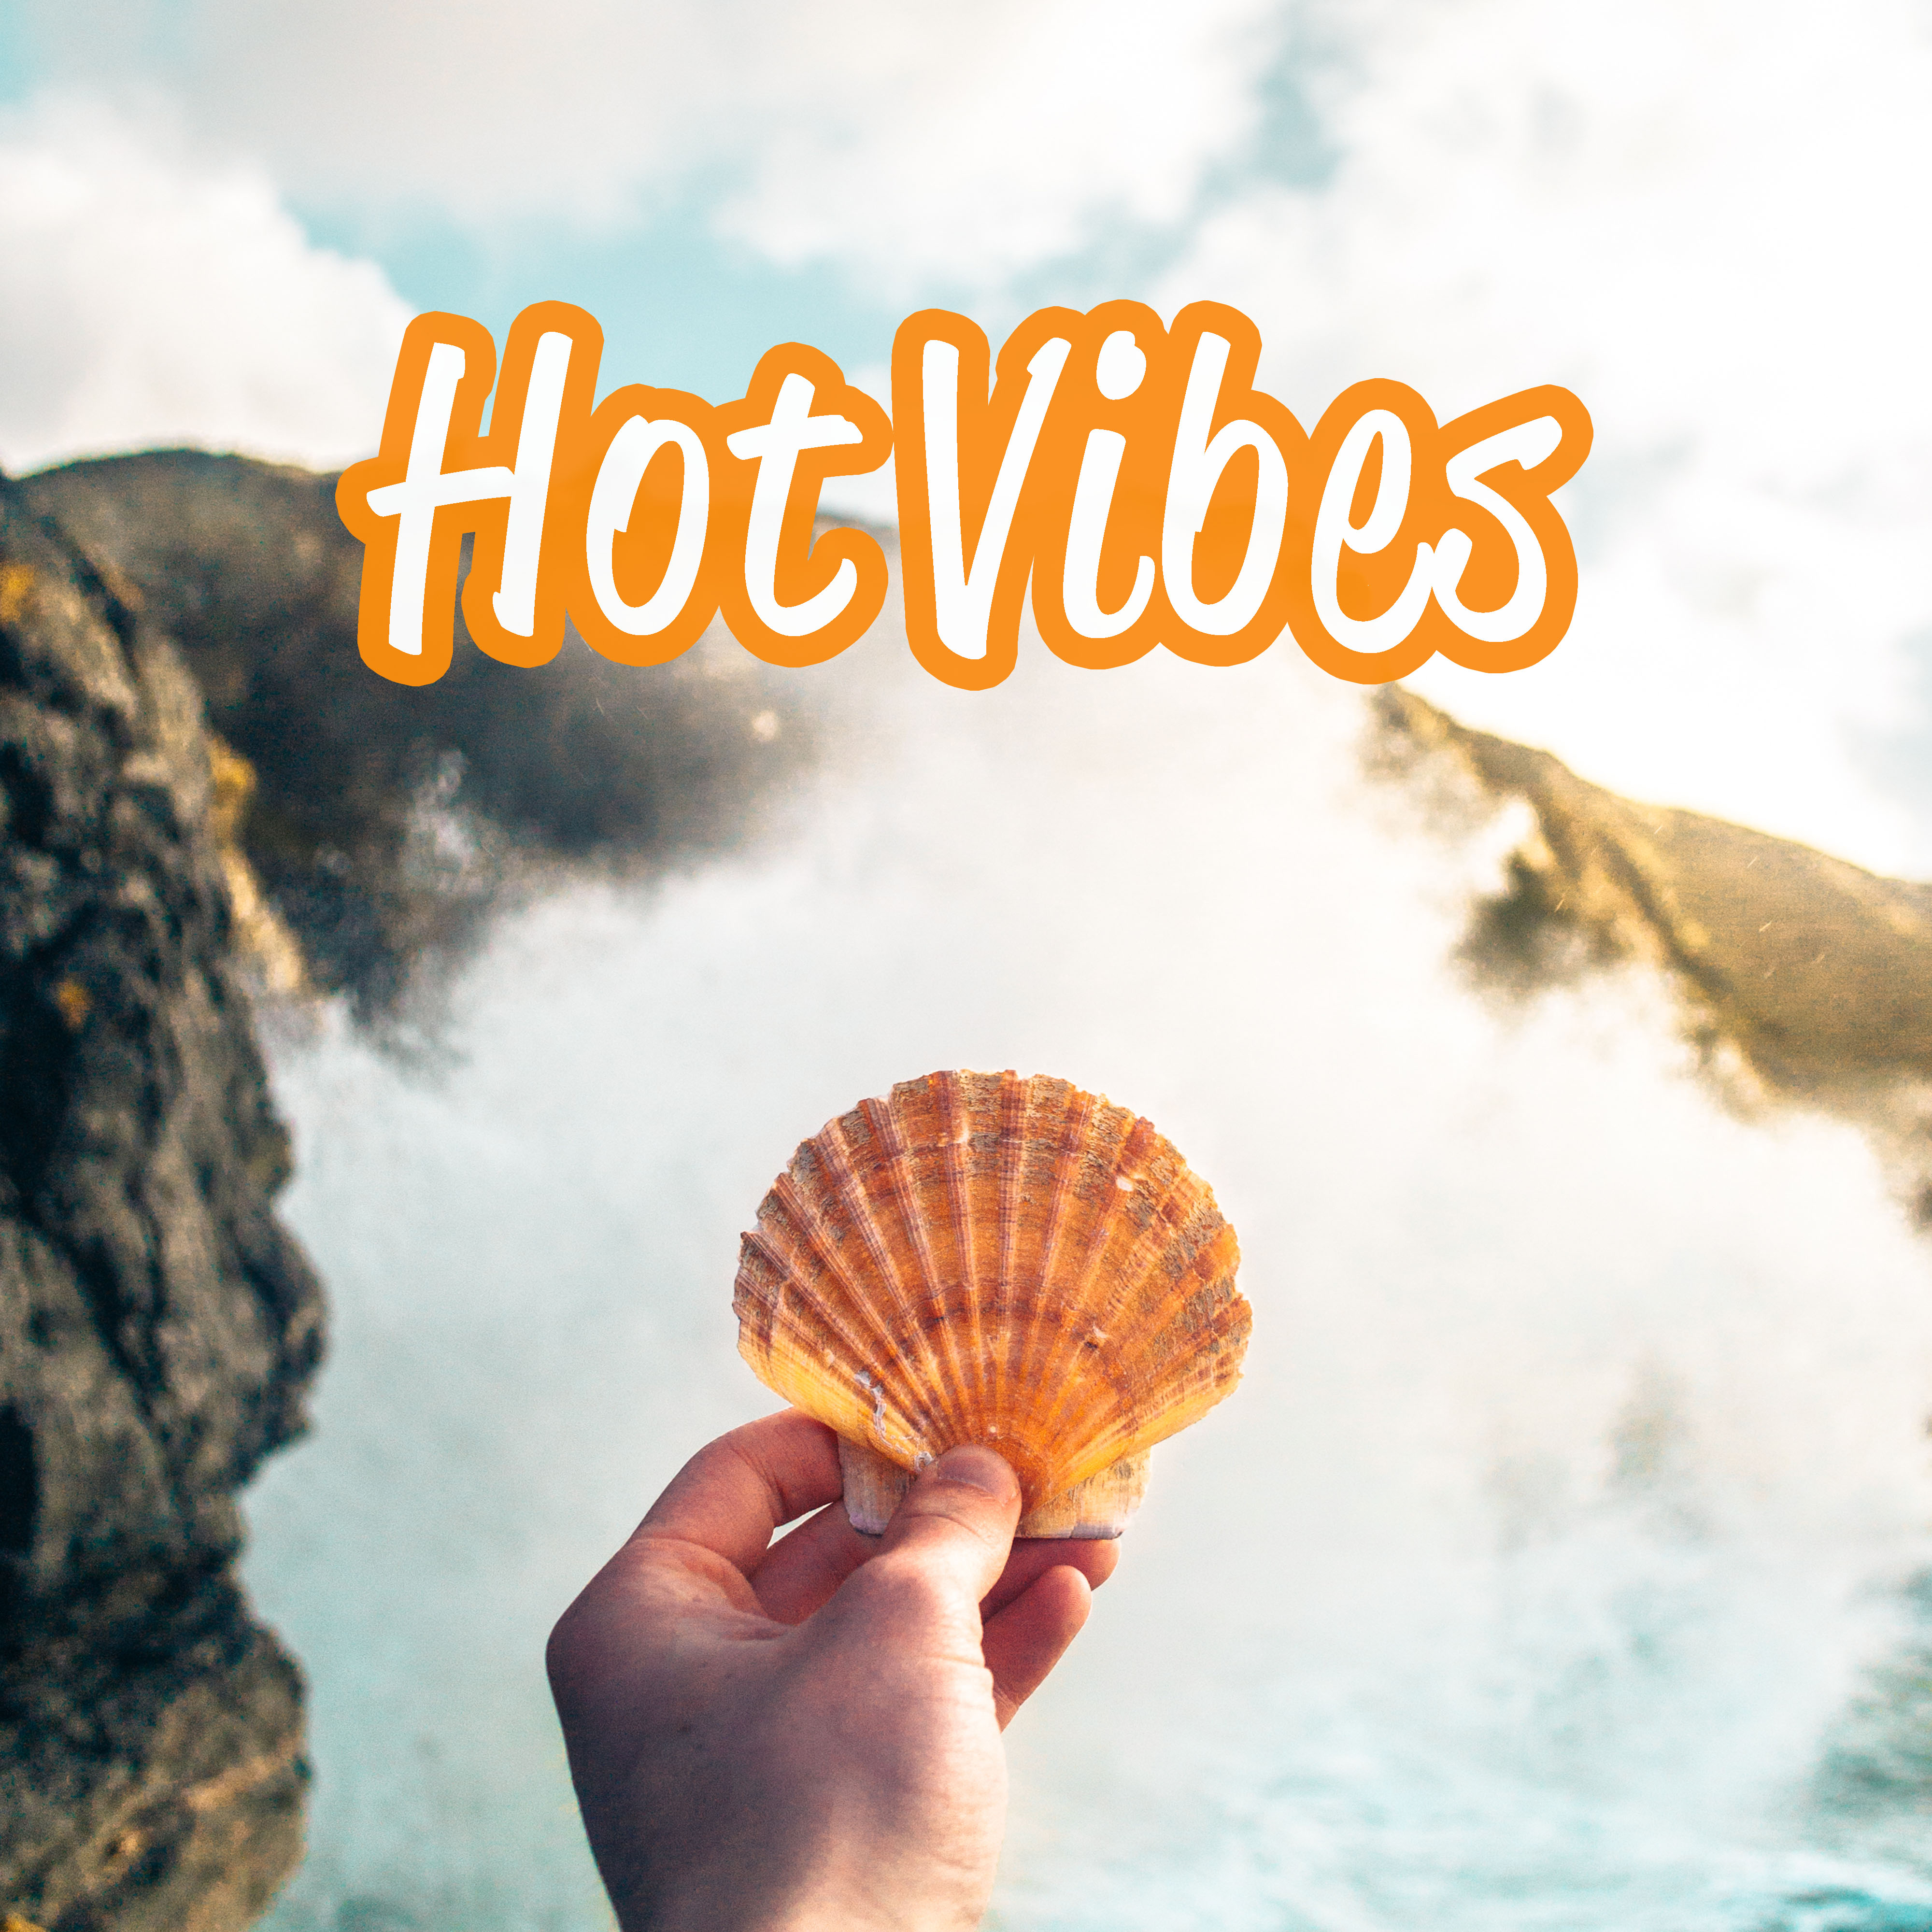 Hot Vibes – Ibiza Beach Party, Sensual Music for Dance, Summer Hits, Electronic Beats, Party Night, Chillout Hits